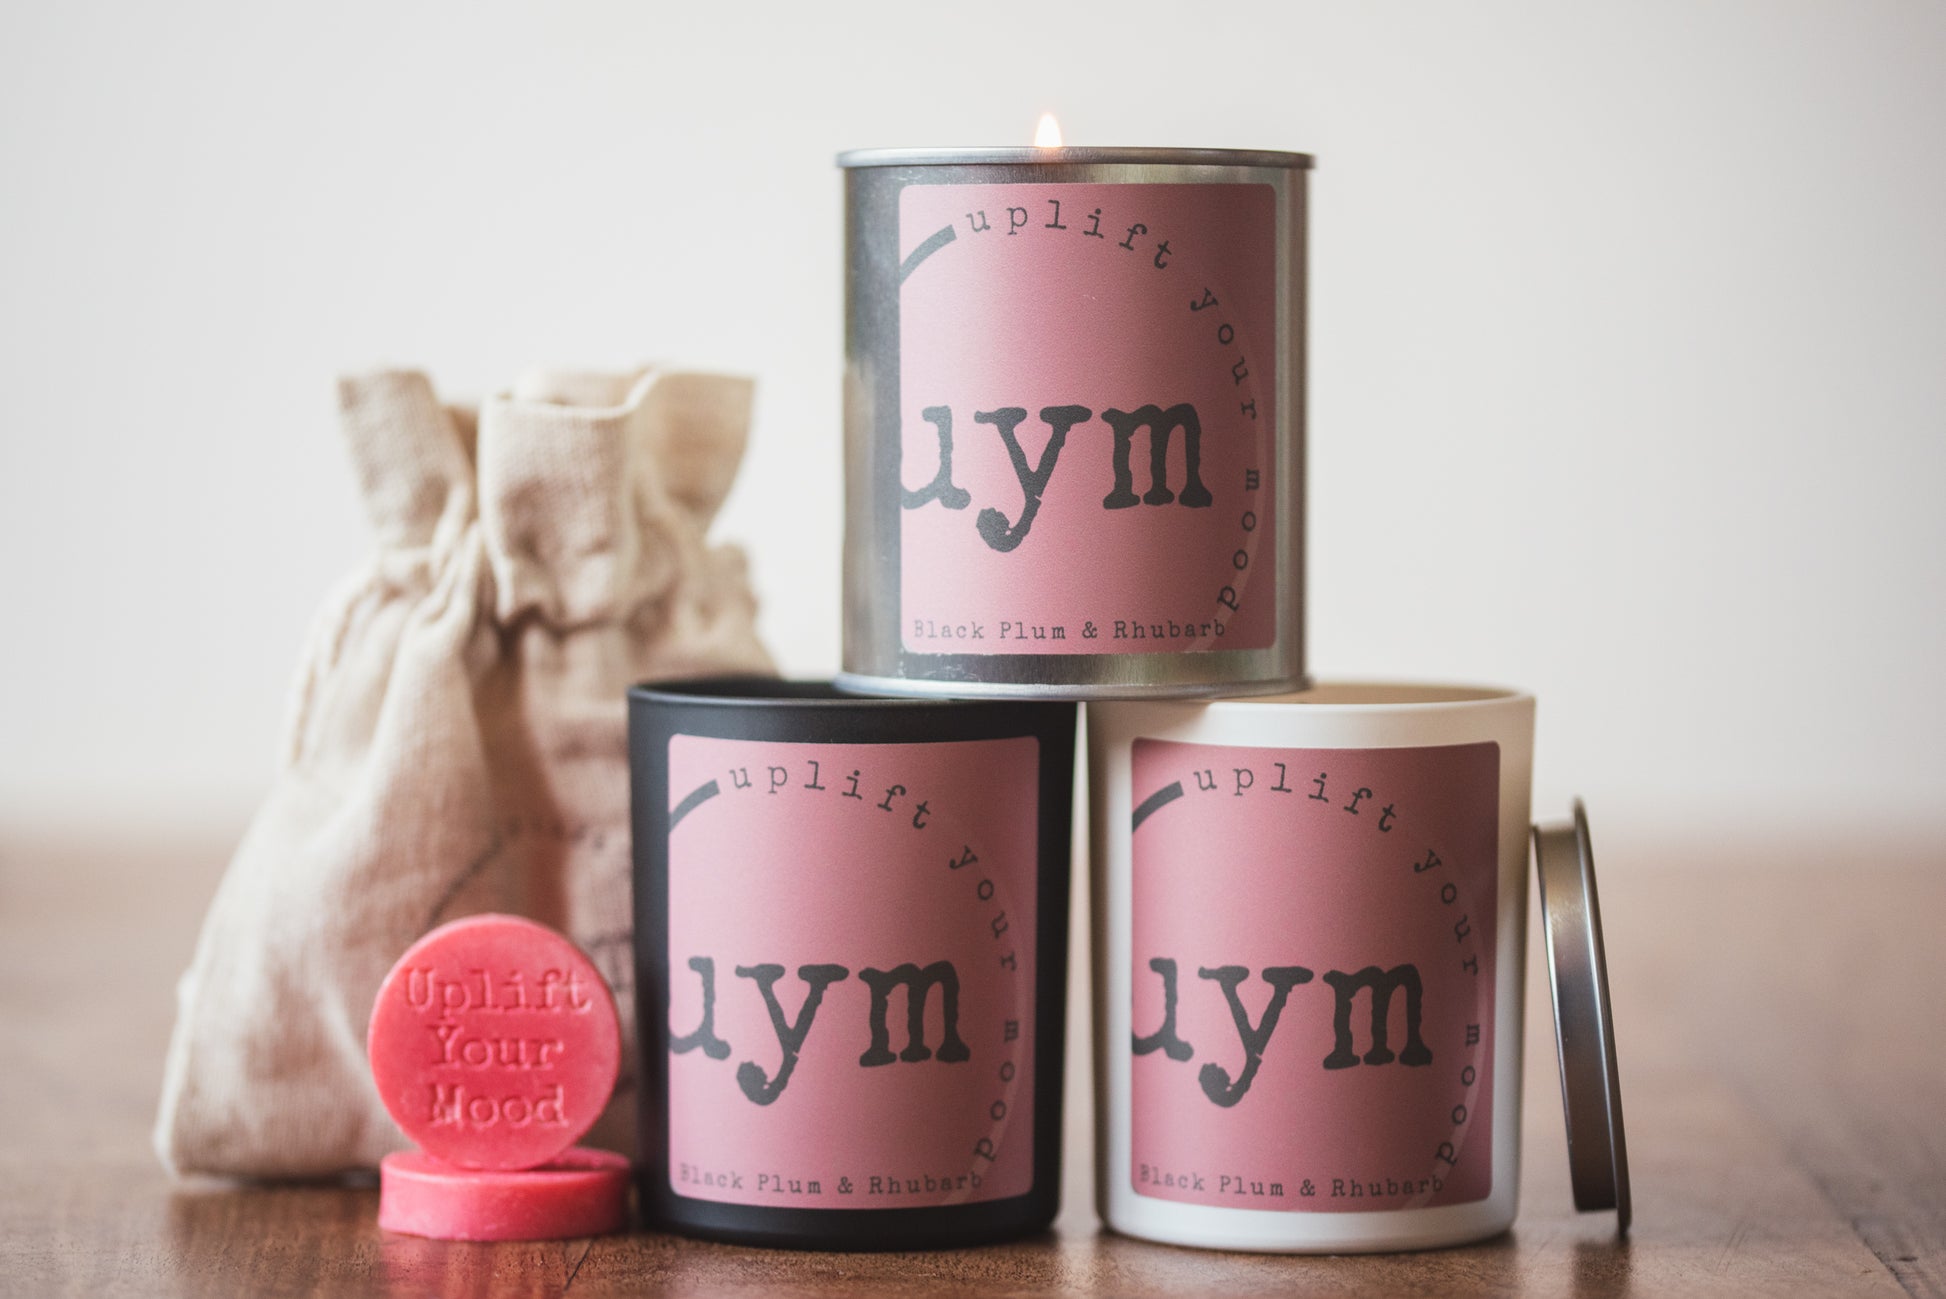 Black Plum&Rhubarb Sustainable Natural Wax Scented Candles and wax melts